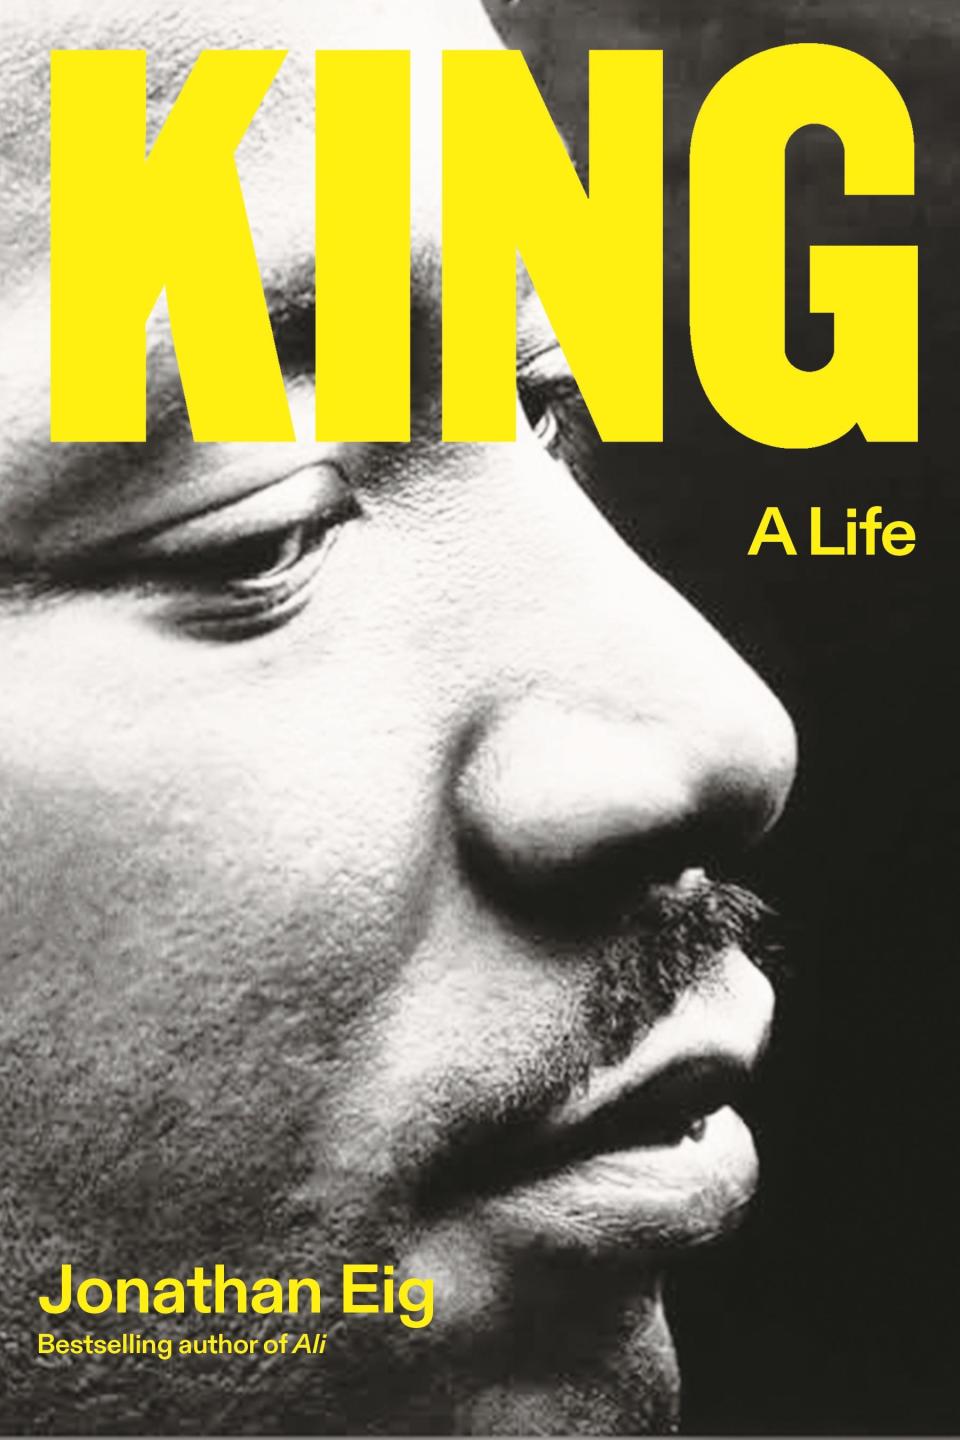 The bestseller "King: A Life" by Jonathan Eig has been hailed as the definitive biography of the civil rights leader. Eig will take part in a Zoom discussion, co-sponsored by Spring Valley's Finkelstein Memorial Library and the Martin Luther King Multi-Purpose Center, on Aug. 24, 2023.